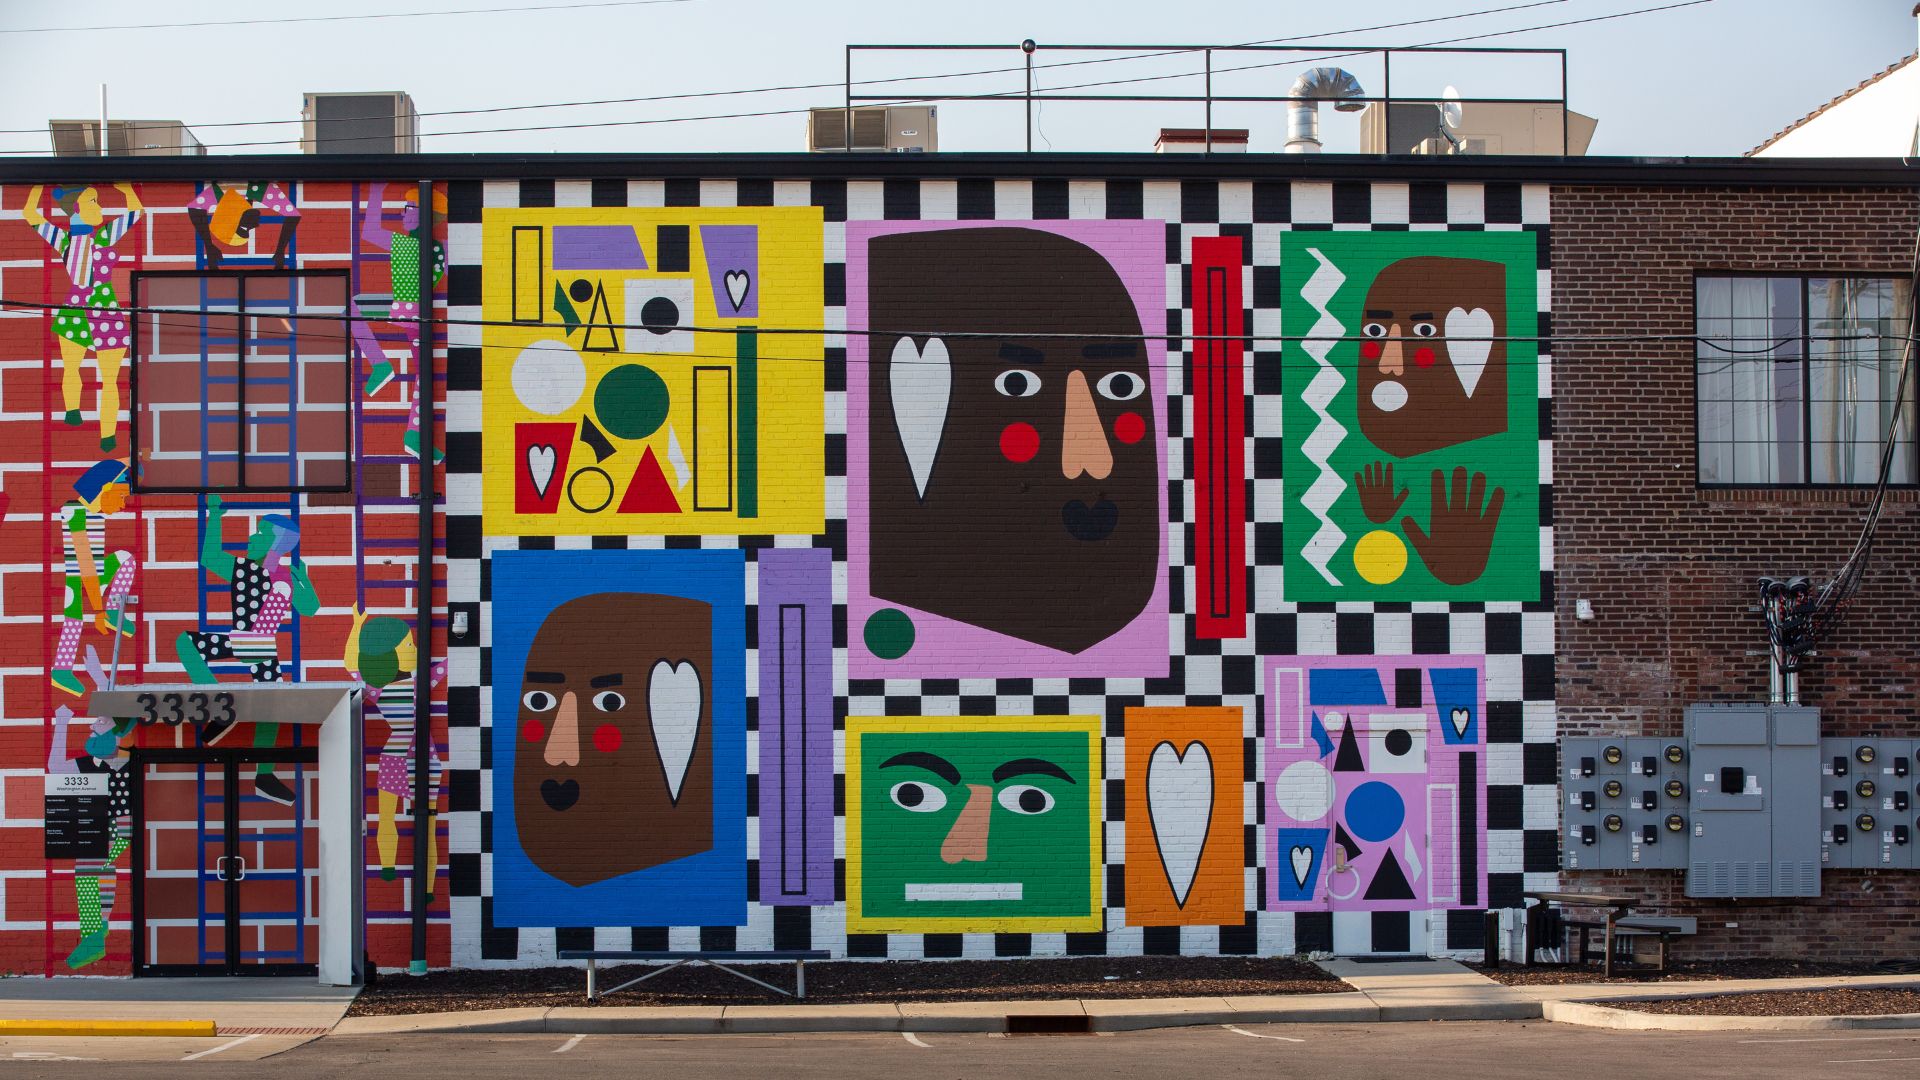 Part of The Walls Off Washington, this mural features a variety of faces on colorful backgrounds.